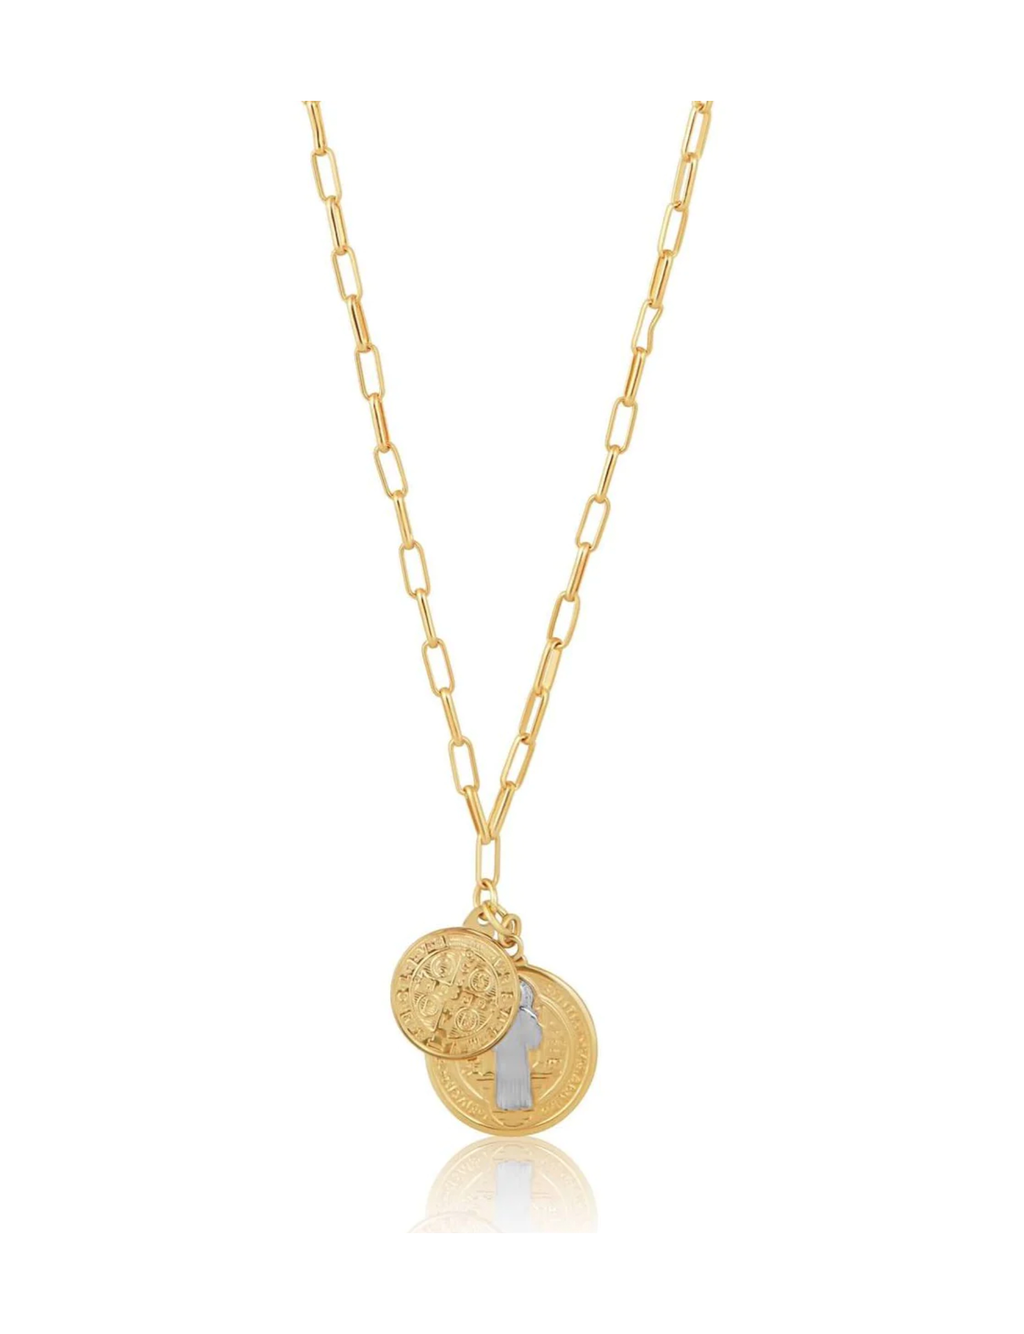 Saint II - St. Benedict Coin Necklace, Gold Filled